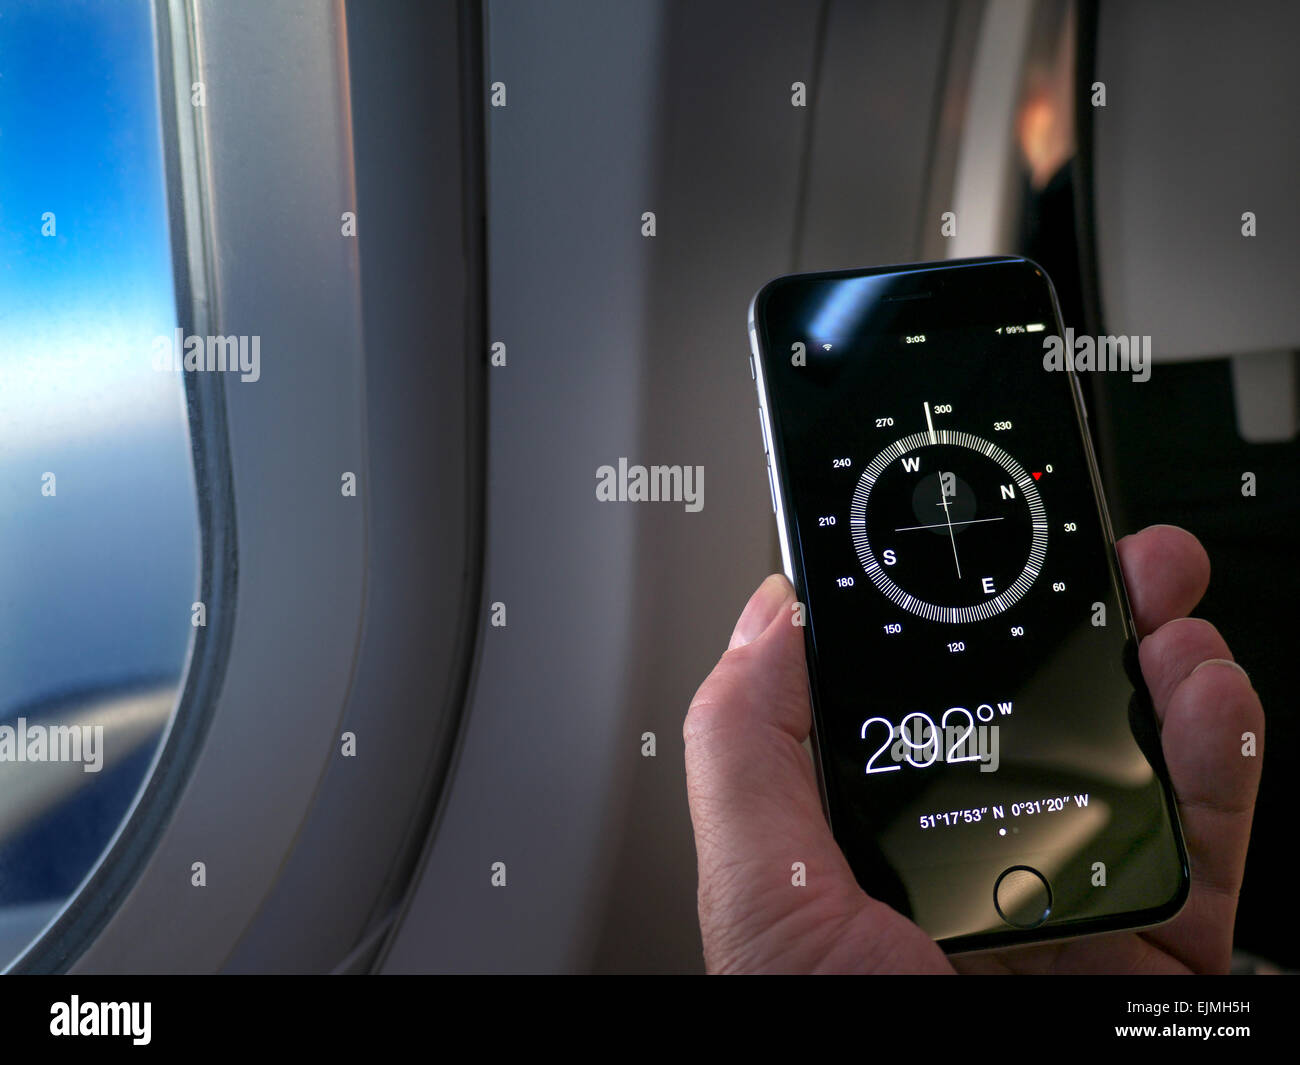 COMPASS SMARTPHONE Hand holding iPhone 6 smartphone displaying compass and direction of flight app on-screen, cabin window wing and sky behind Stock Photo